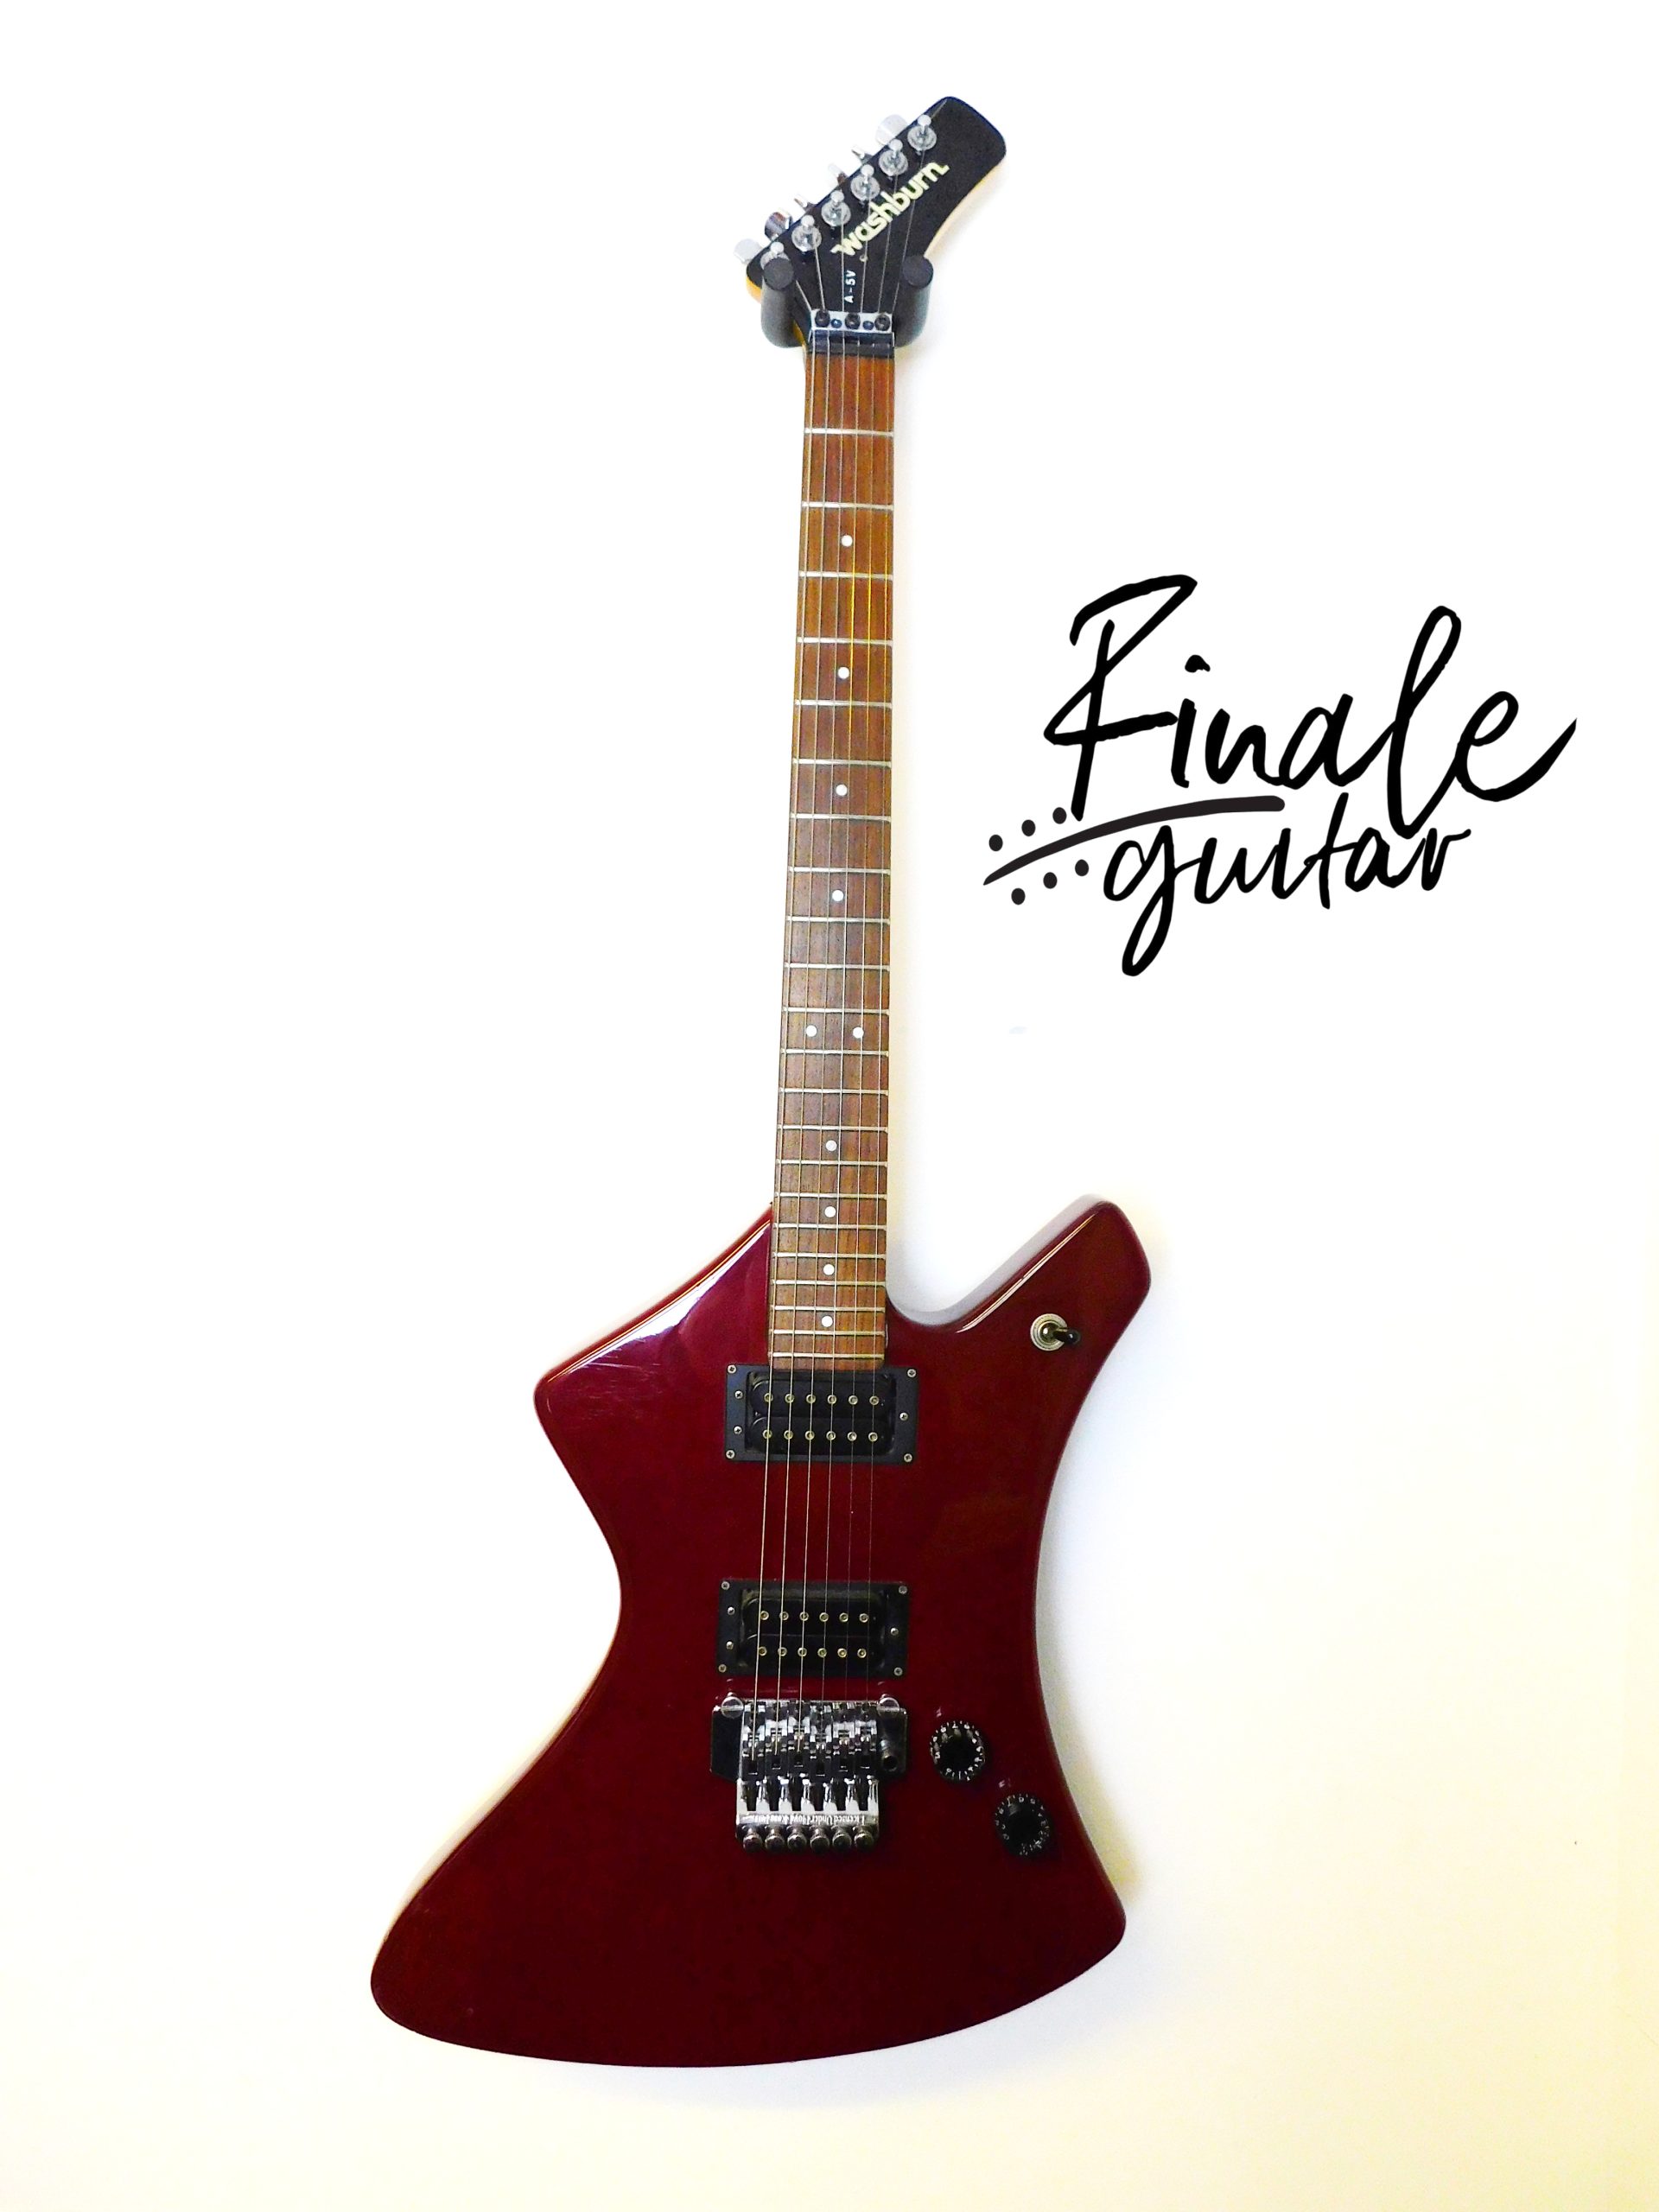 Washburn A5-V electric guitar for sale in our Sheffield guitar shop, Finale Guitar